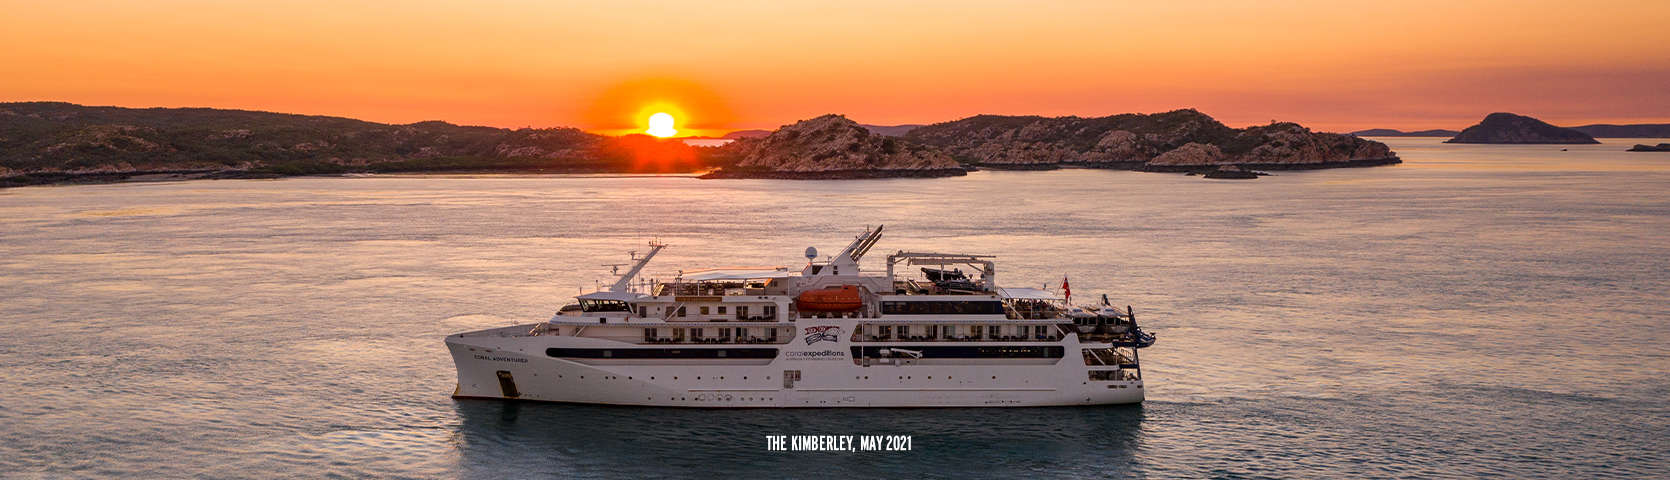 The Kimberley Coral Adventurer Sunset May 2021